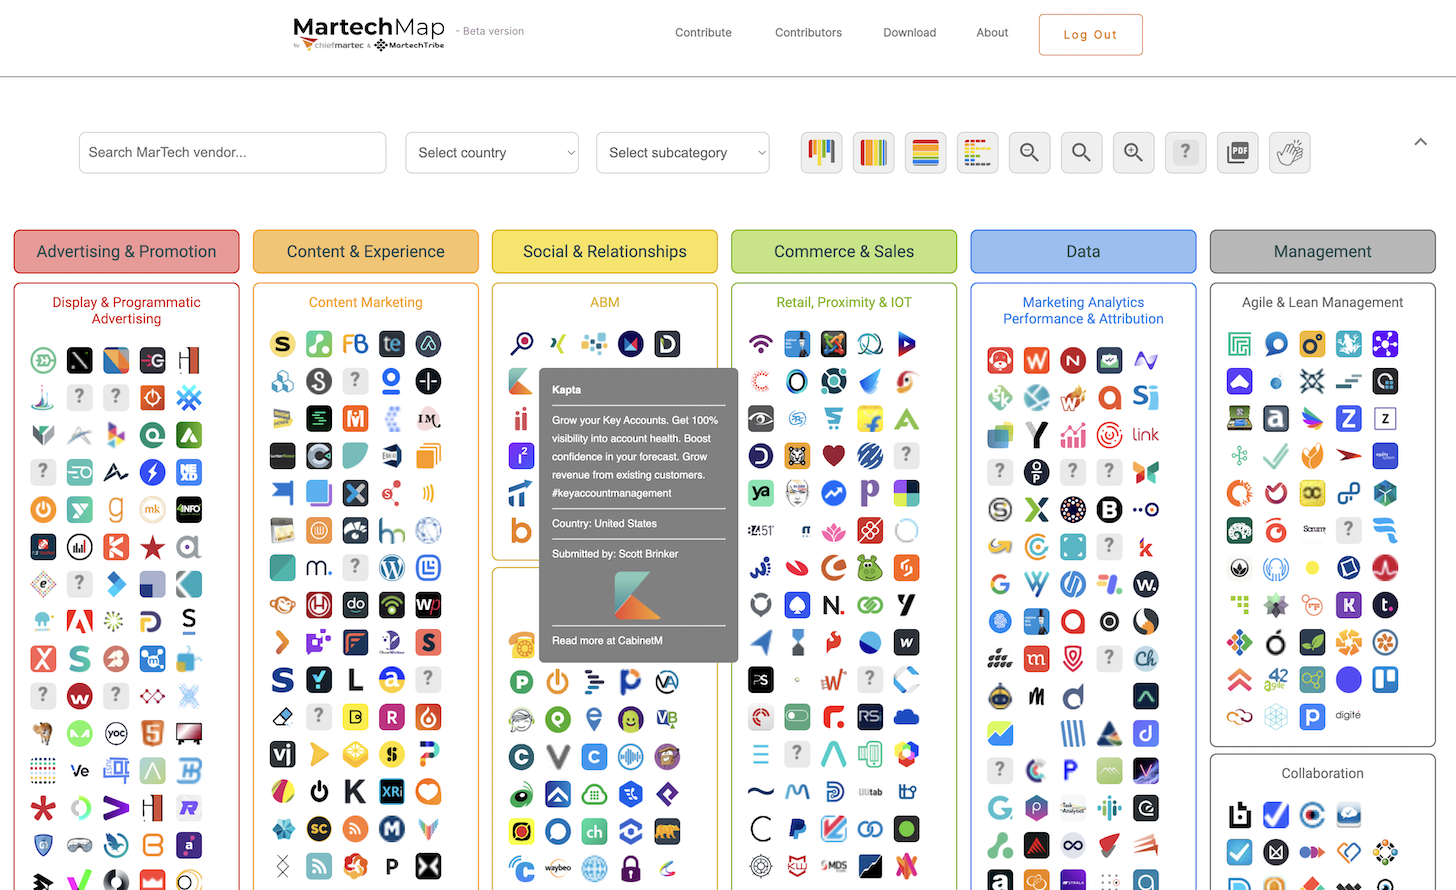 Martech Stack